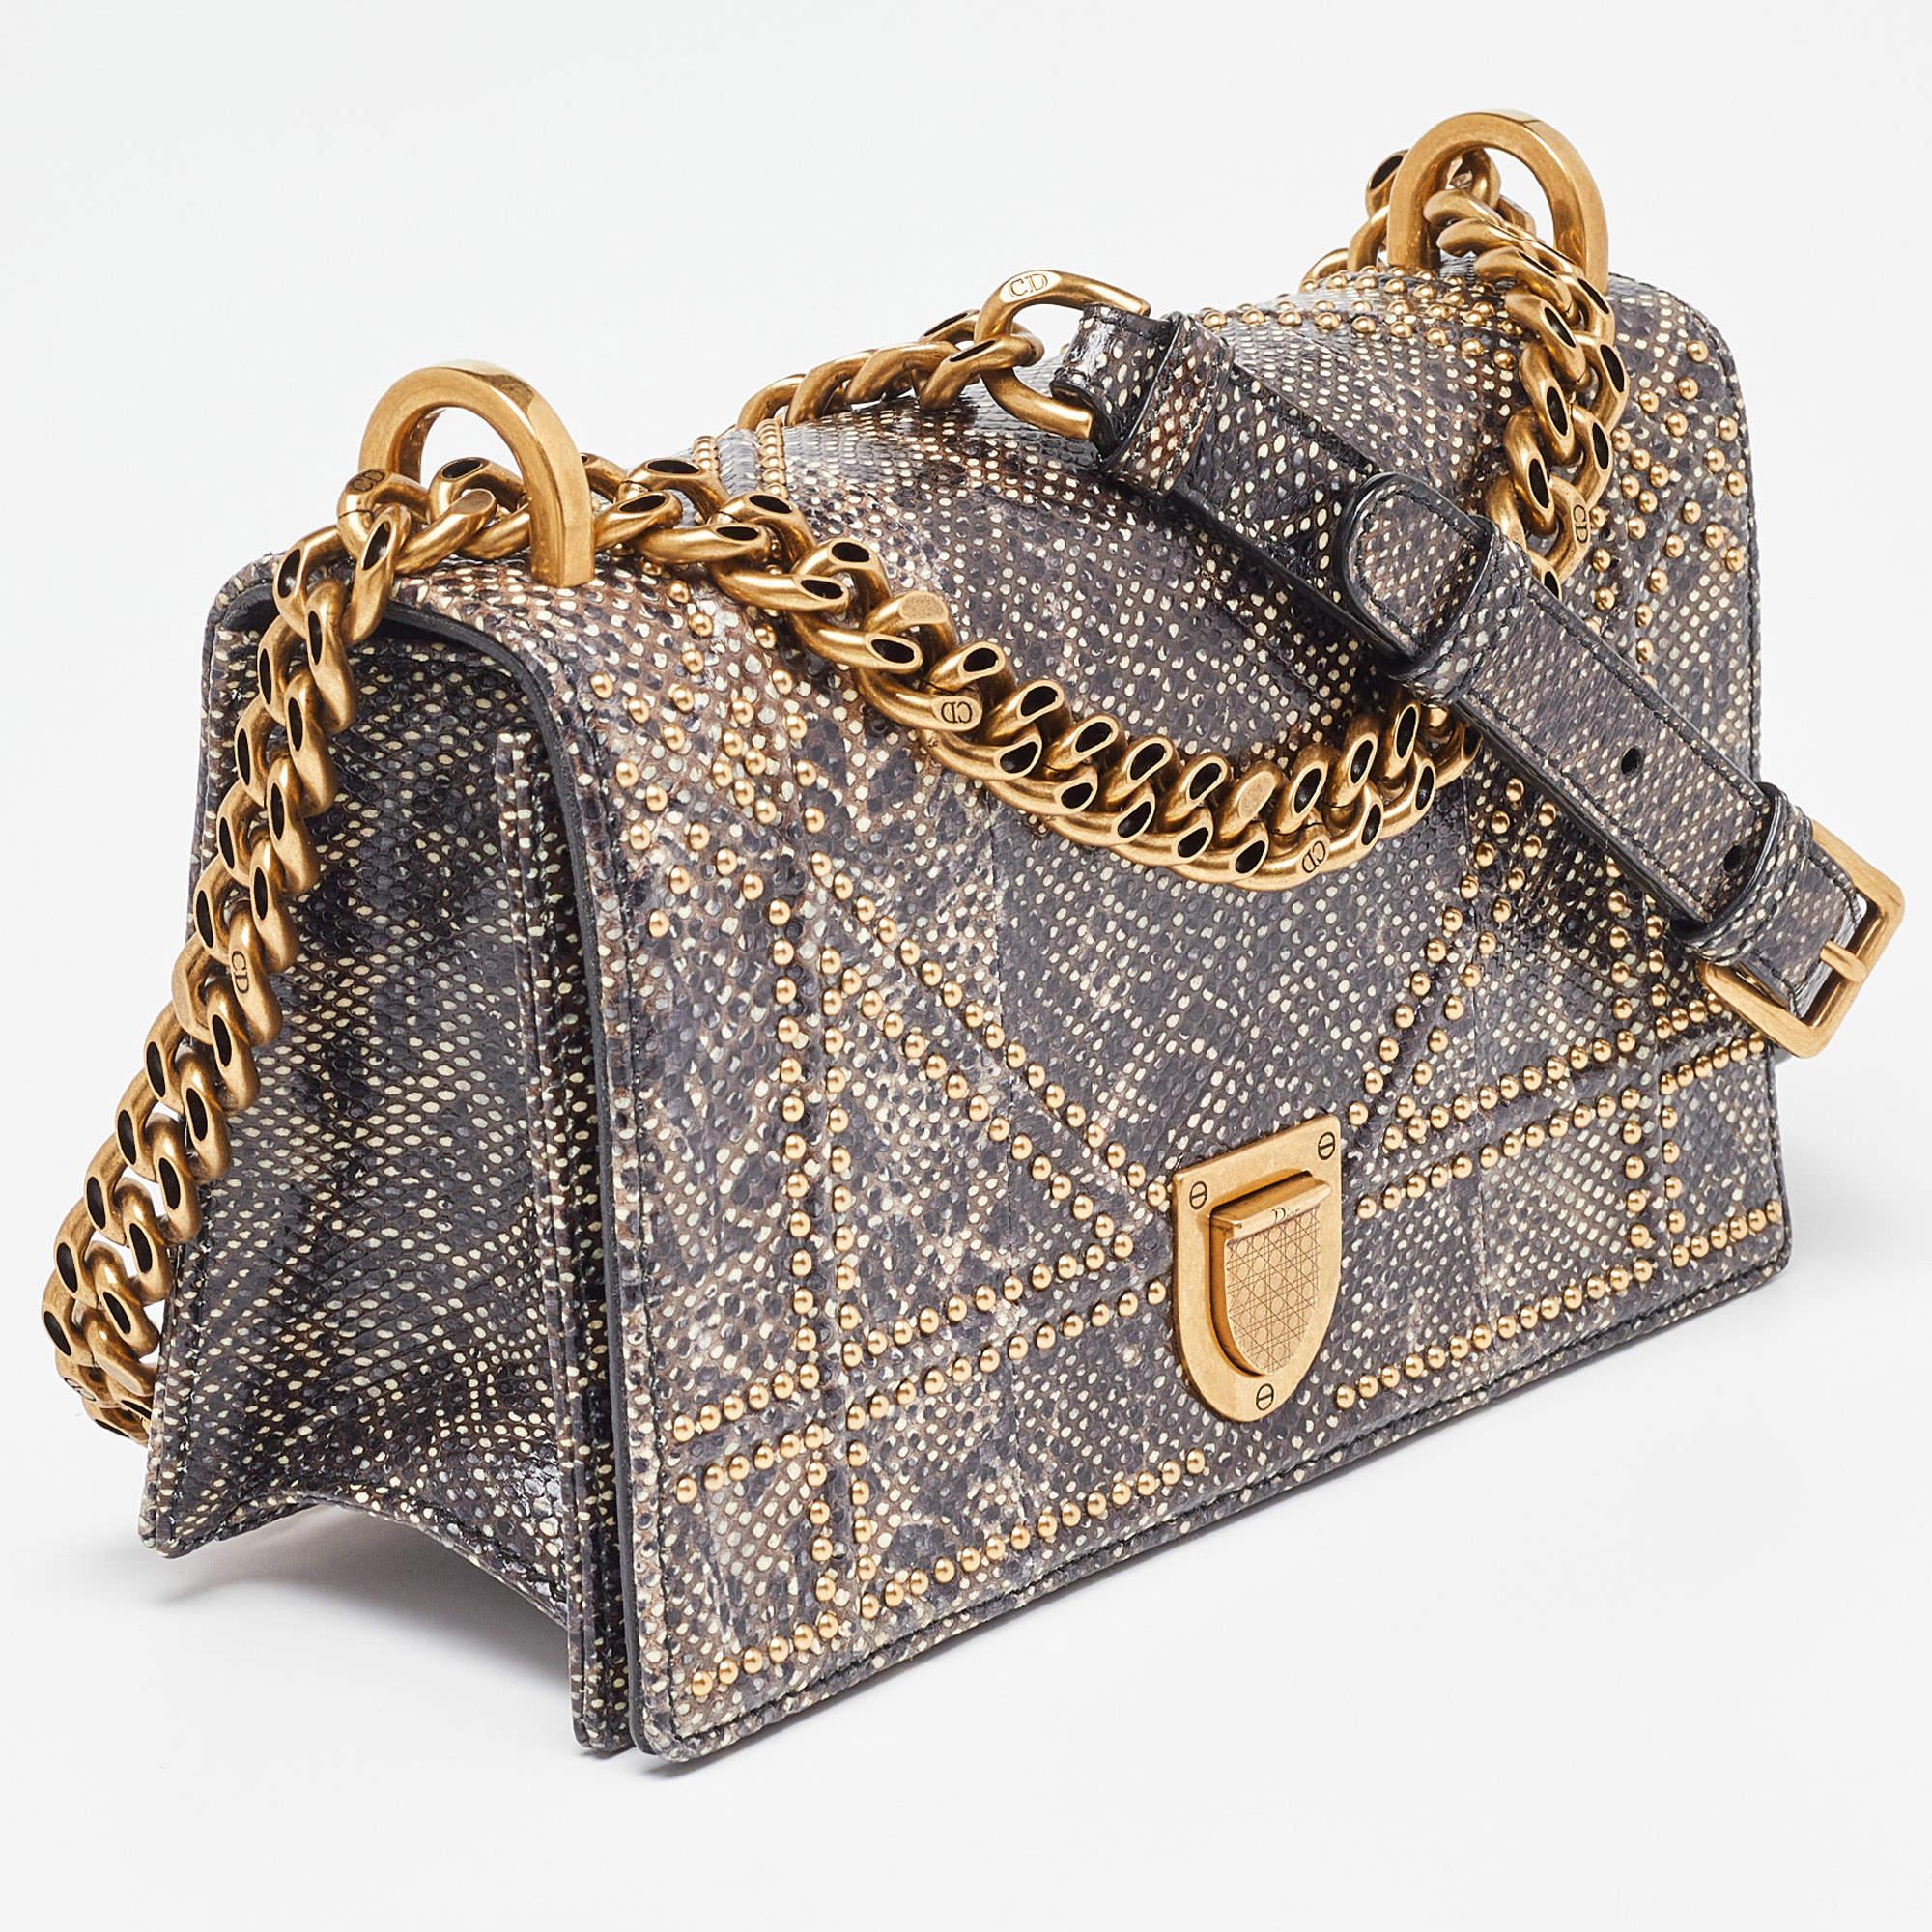 For a look that is complete with style, taste, and a touch of luxe, this designer bag is the perfect addition. Flaunt this beauty on your shoulder and revel in the taste of luxury it leaves you with.

